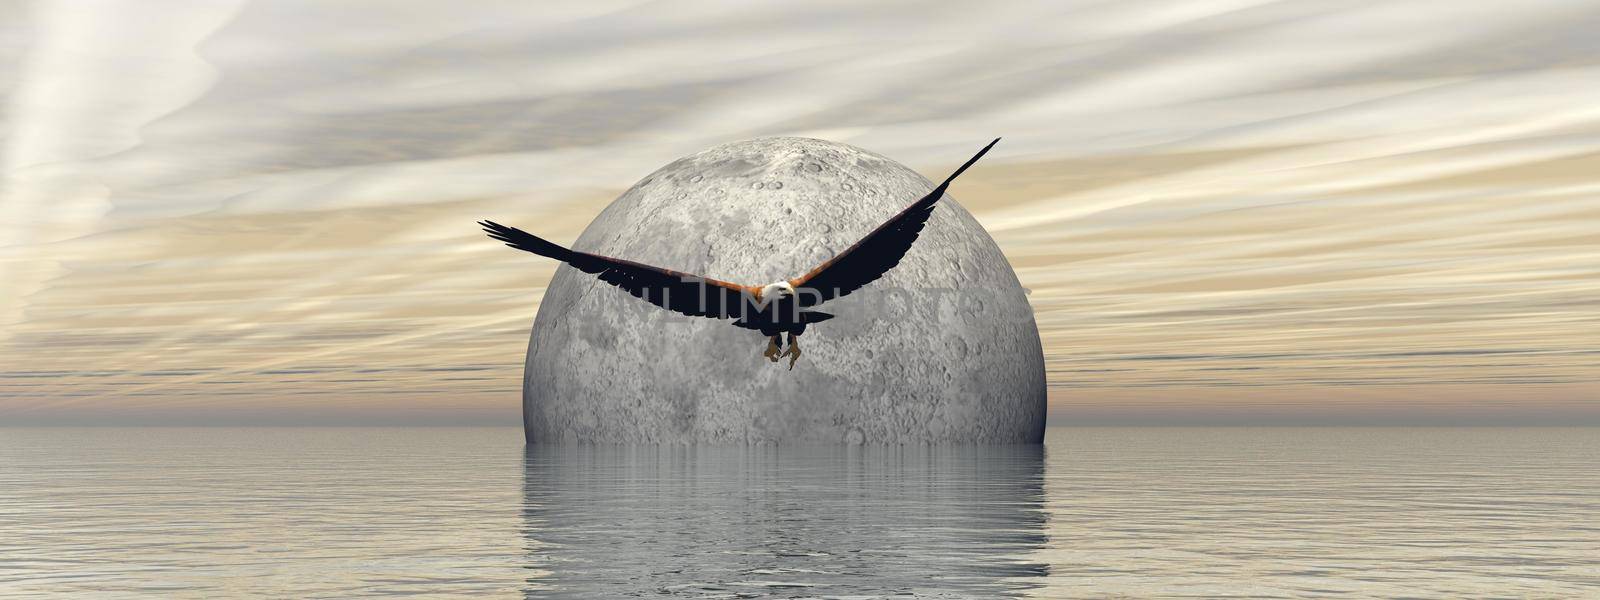 flying an eagle brown with a beautiful full moon landscape - 3d rendering